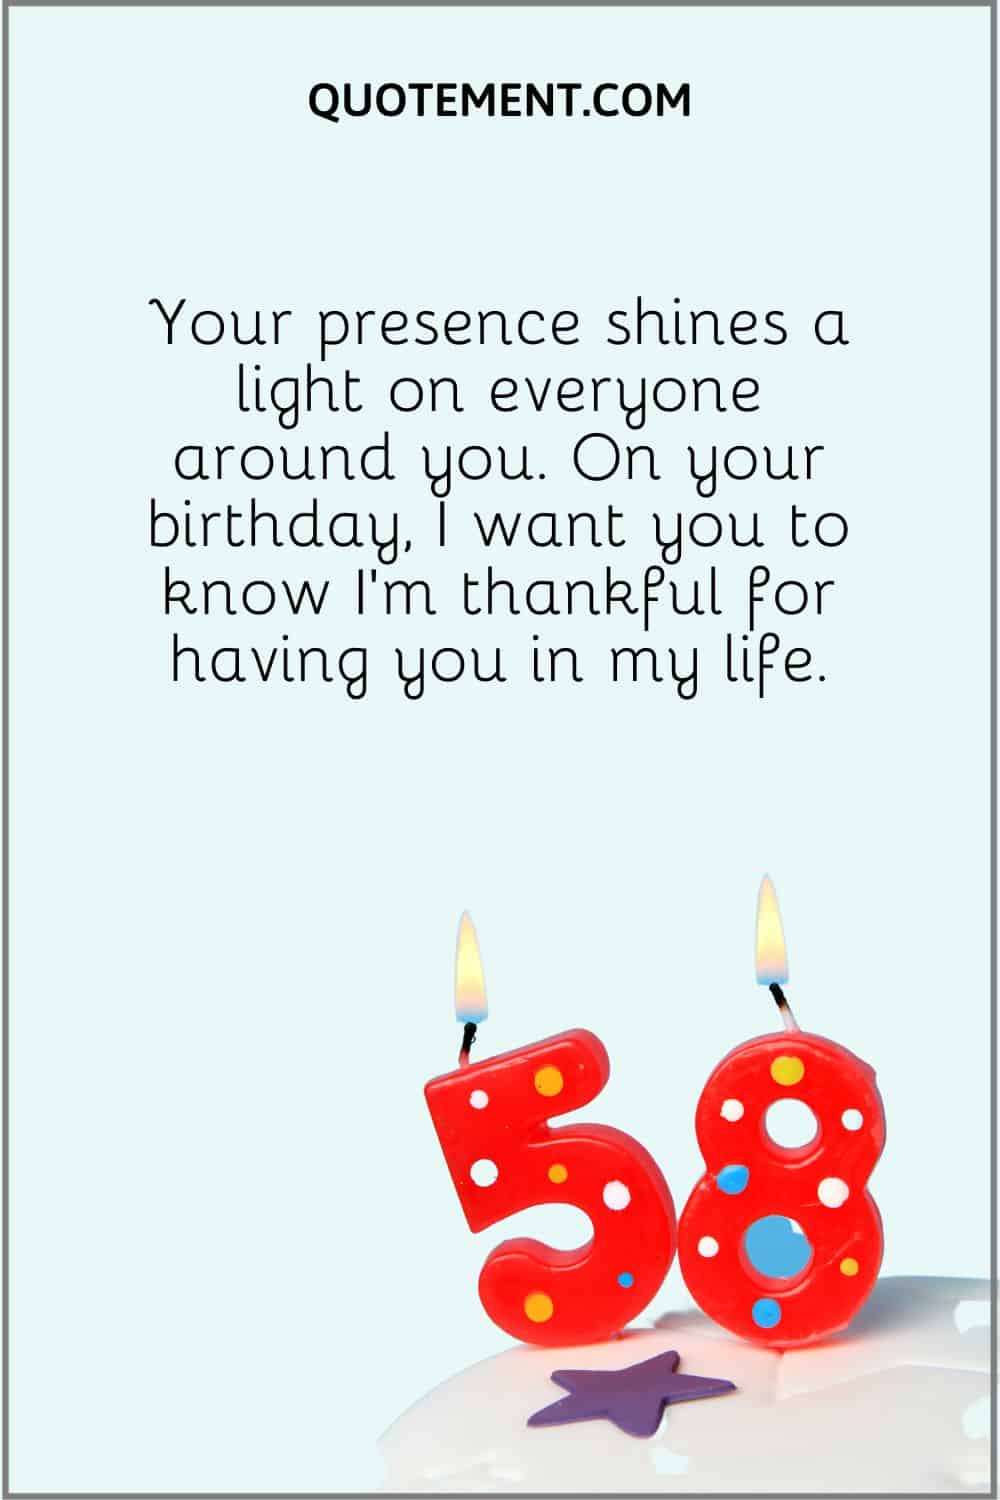 “Your presence shines a light on everyone around you. On your birthday, I want you to know I’m thankful for having you in my life.”